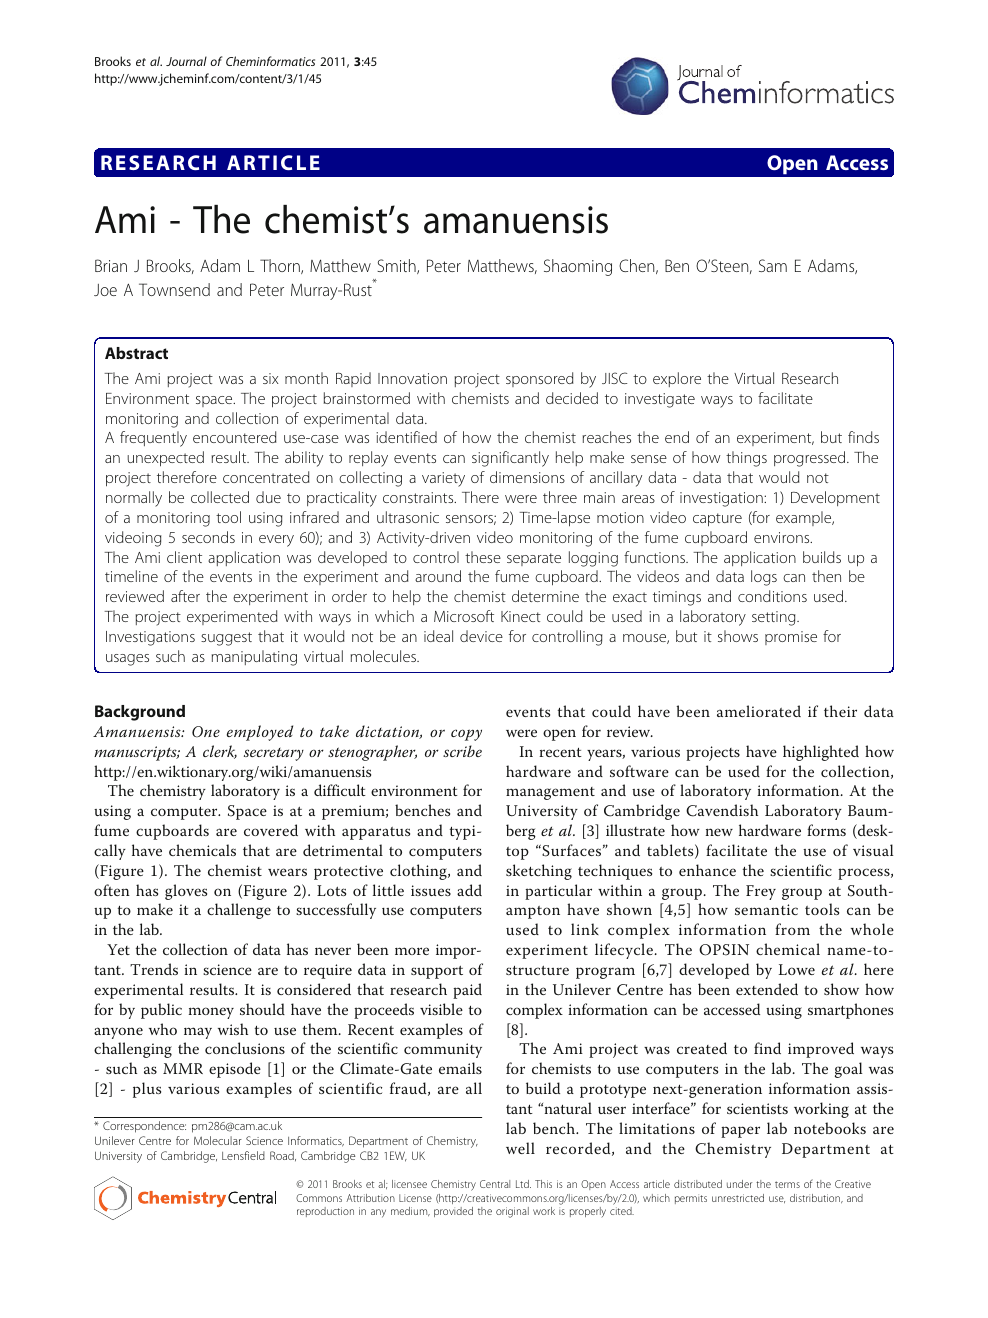 Ami The Chemist S Amanuensis Topic Of Research Paper In